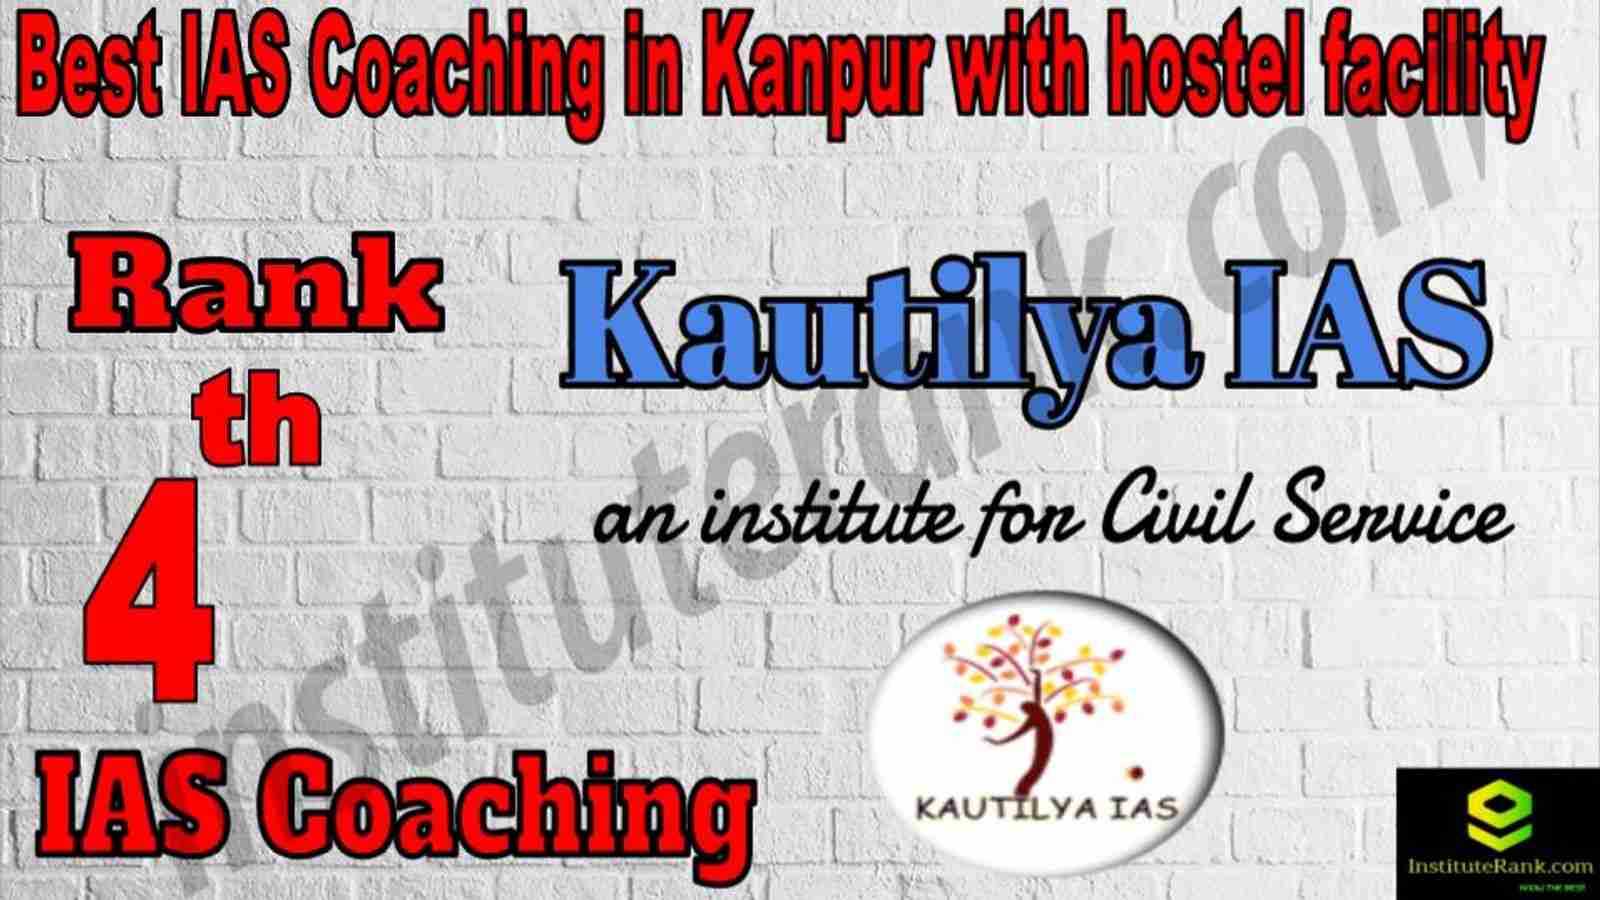 4th Best IAS Coaching in Kanpur With hostel facility